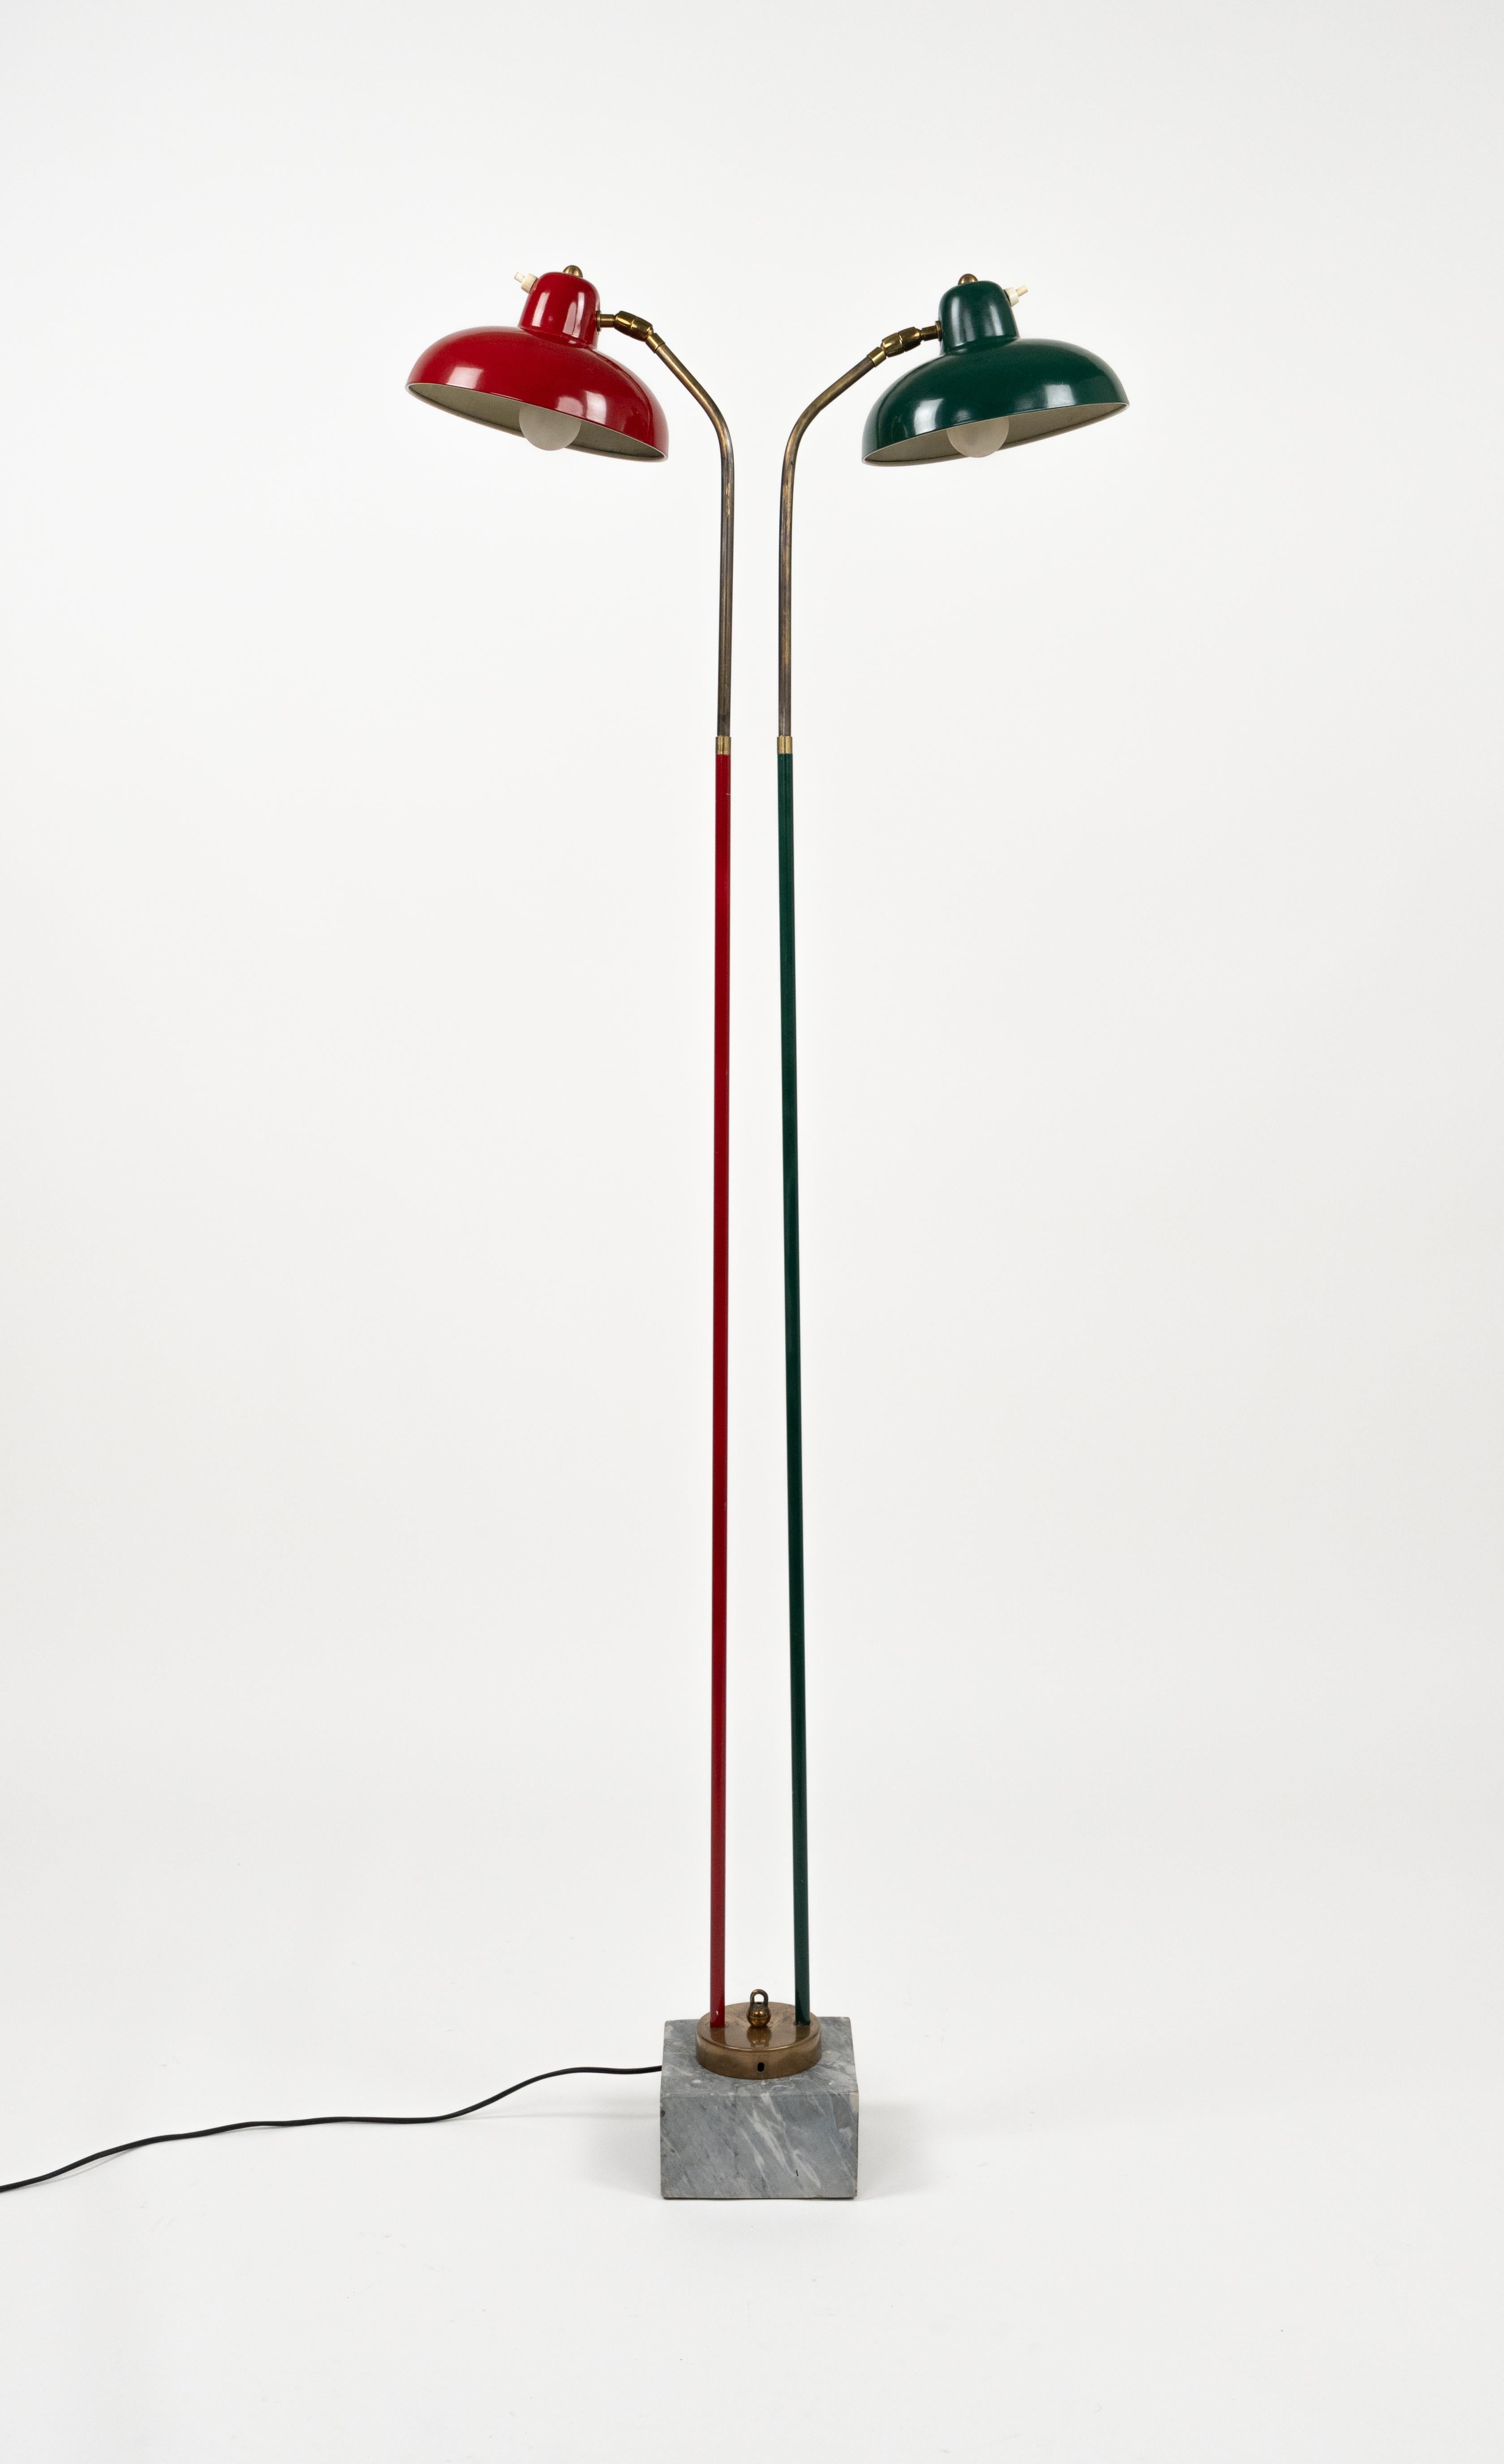 Floor Lamp in Marble, Lacquered Metal and Brass Stilnovo Style, Italy 1950s For Sale 2